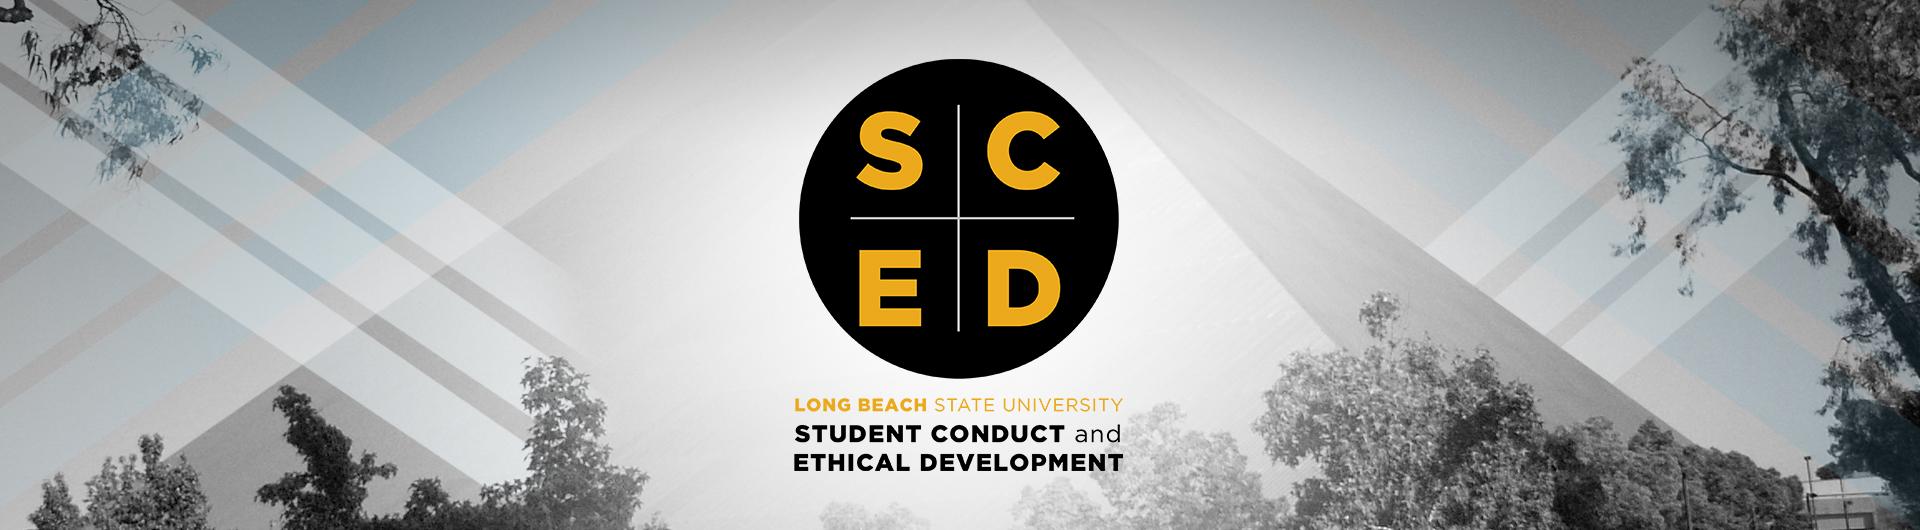 Banner for Student Conduct and Ethical Development